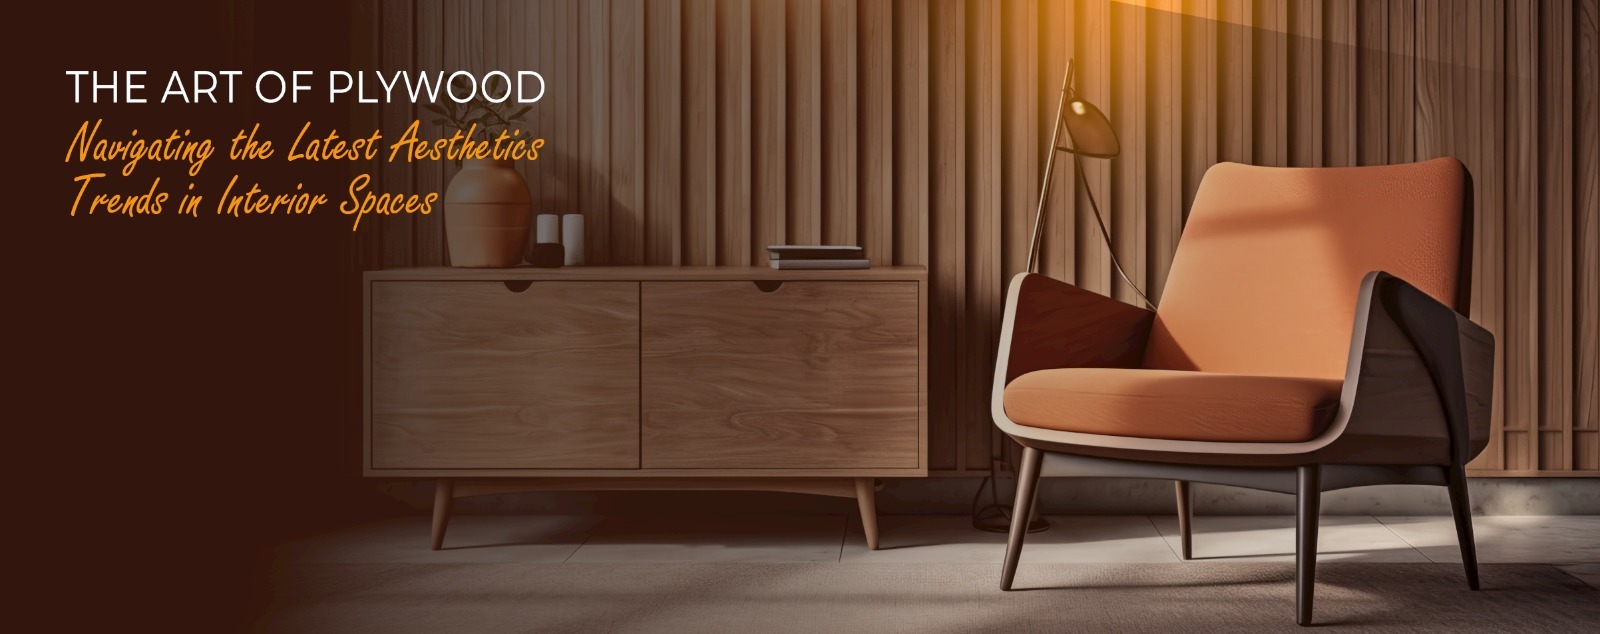 The Art of Plywood: Navigating the Latest Aesthetics Trends in Interior Spaces